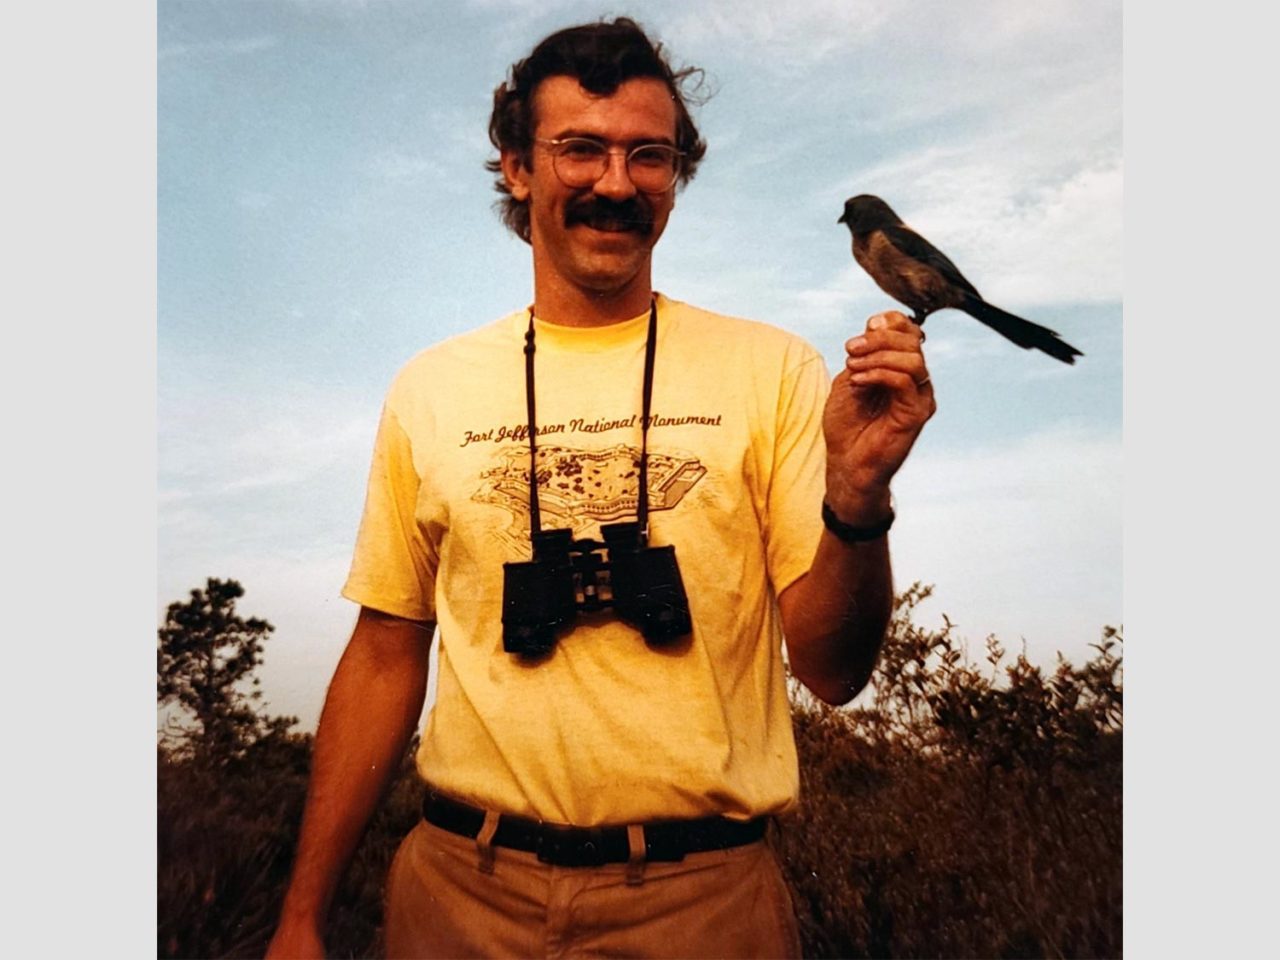 John Fitzpatrick in 1980s, Florida Scrub-Jay perched on his hand